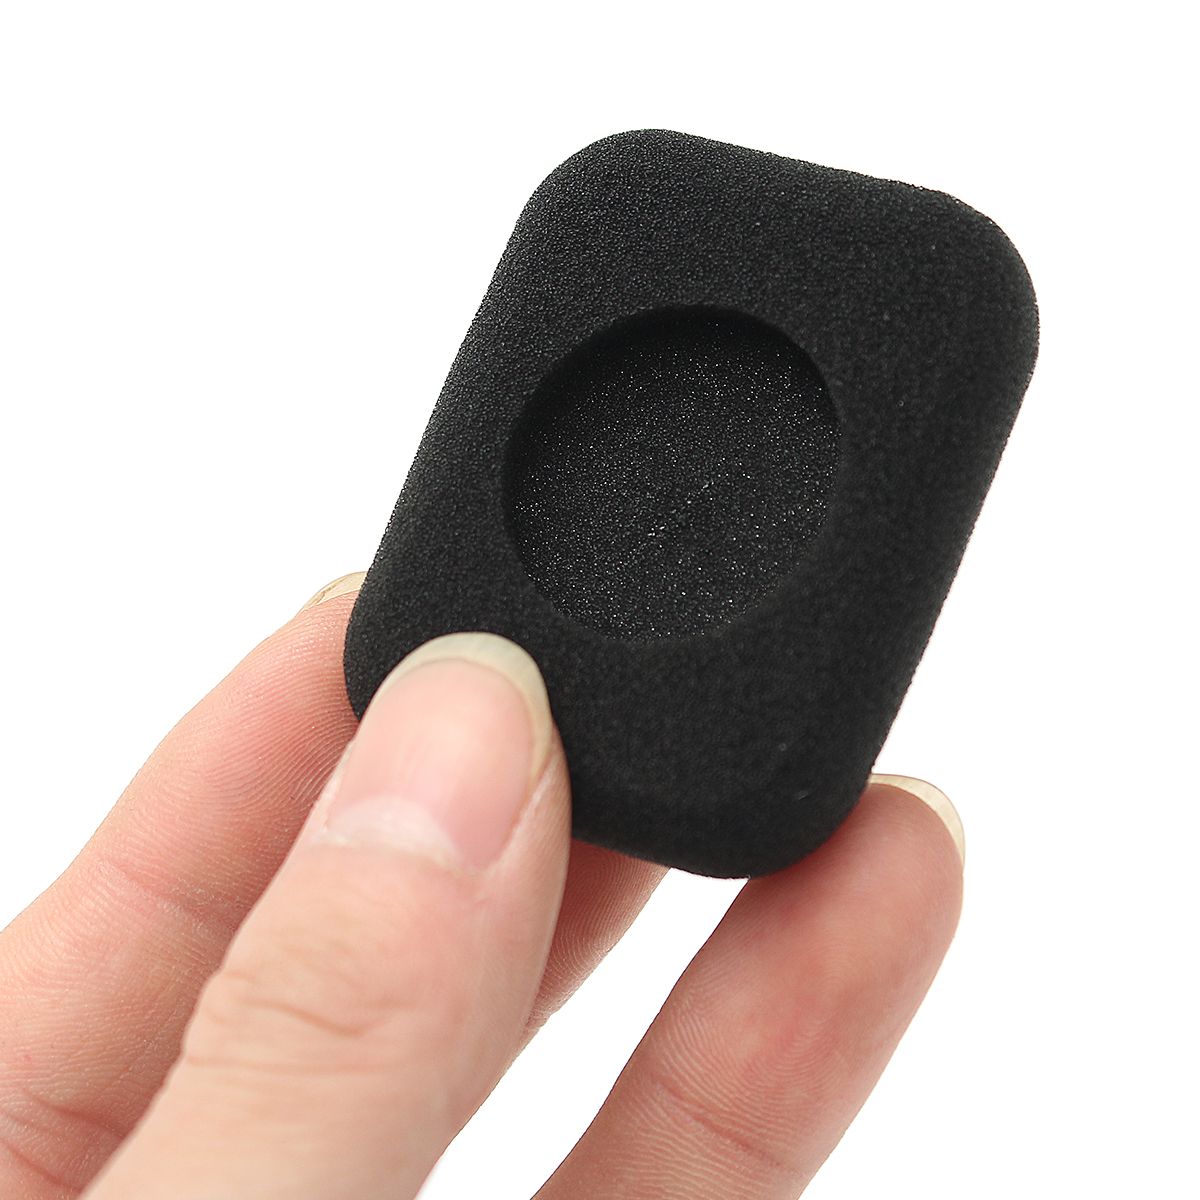 Replacement-Ear-Pads-Covers-Headphone-Cushion-Foam-For-Bang-Olufsen-B-O-Beoplay-Form-2-2i-1462875